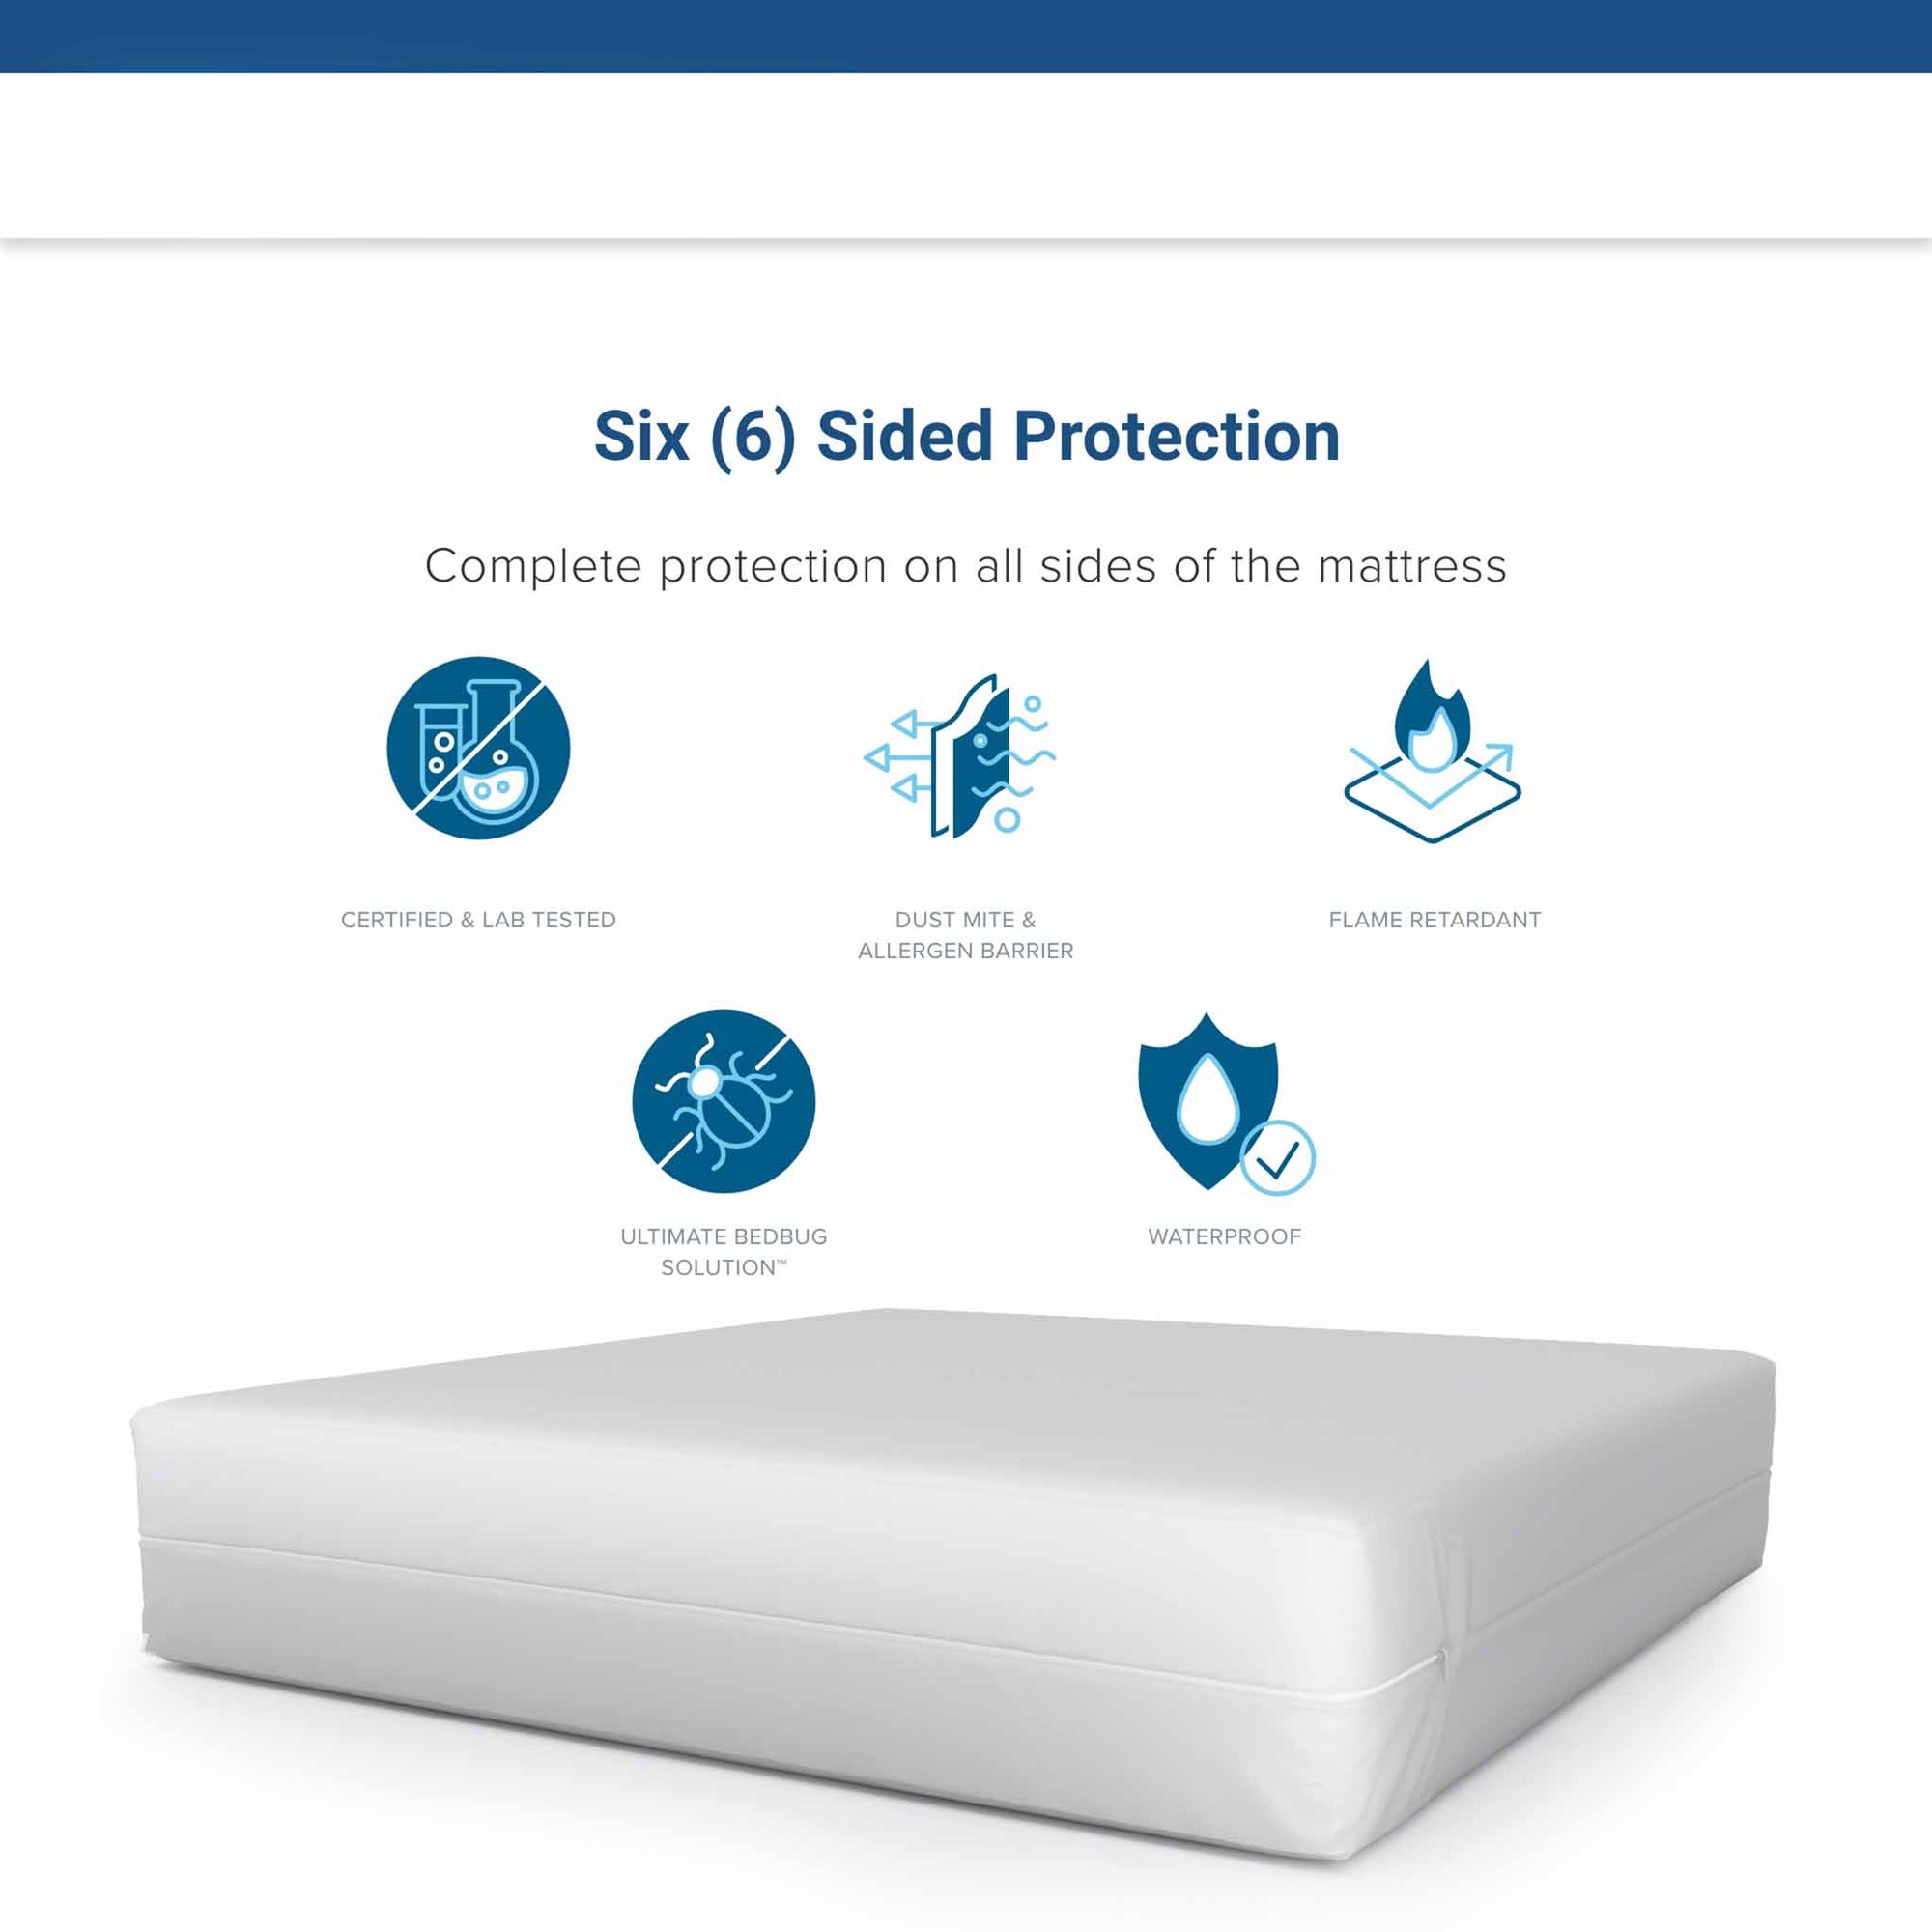 Can a Plastic Mattress Cover Protect From Bed Bugs?